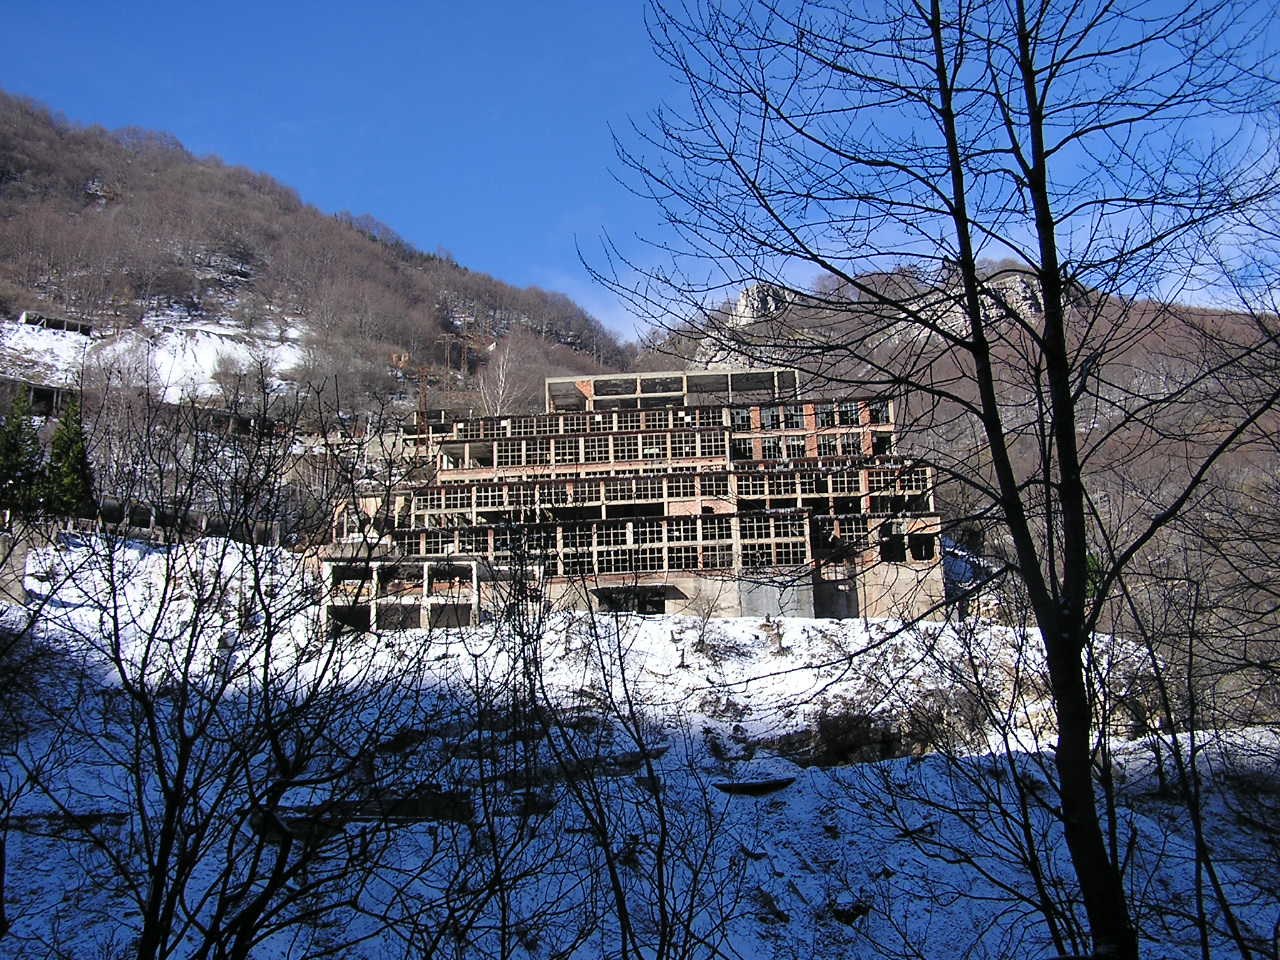 The buildings where the mineral working plants, offices, miners' changing rooms and canteen were located. All these premises had been built on the mountain's flank in proximity to the mine's main tunnel access.